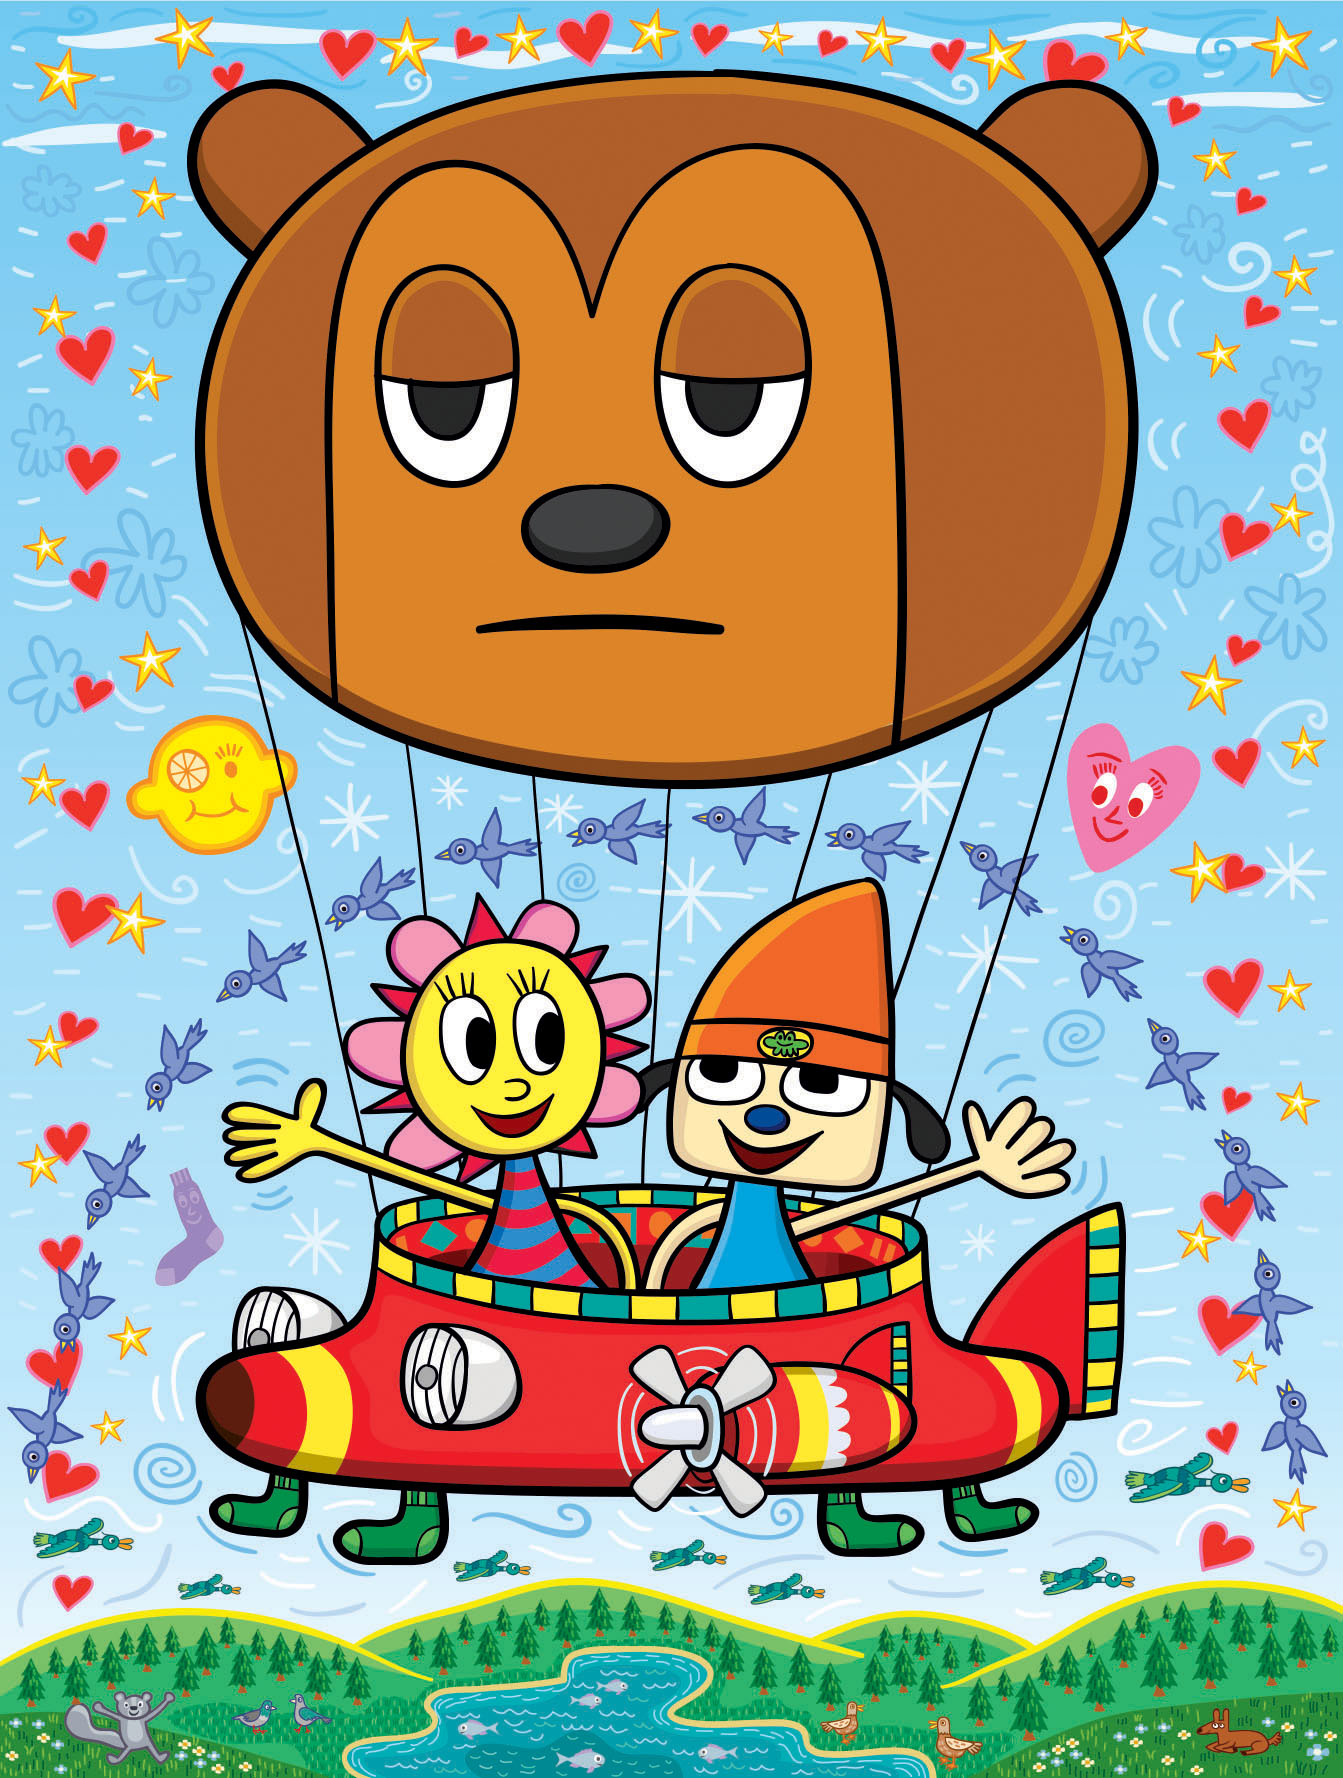 Parappa The Rapper - Parappa The Rapper - Posters and Art Prints